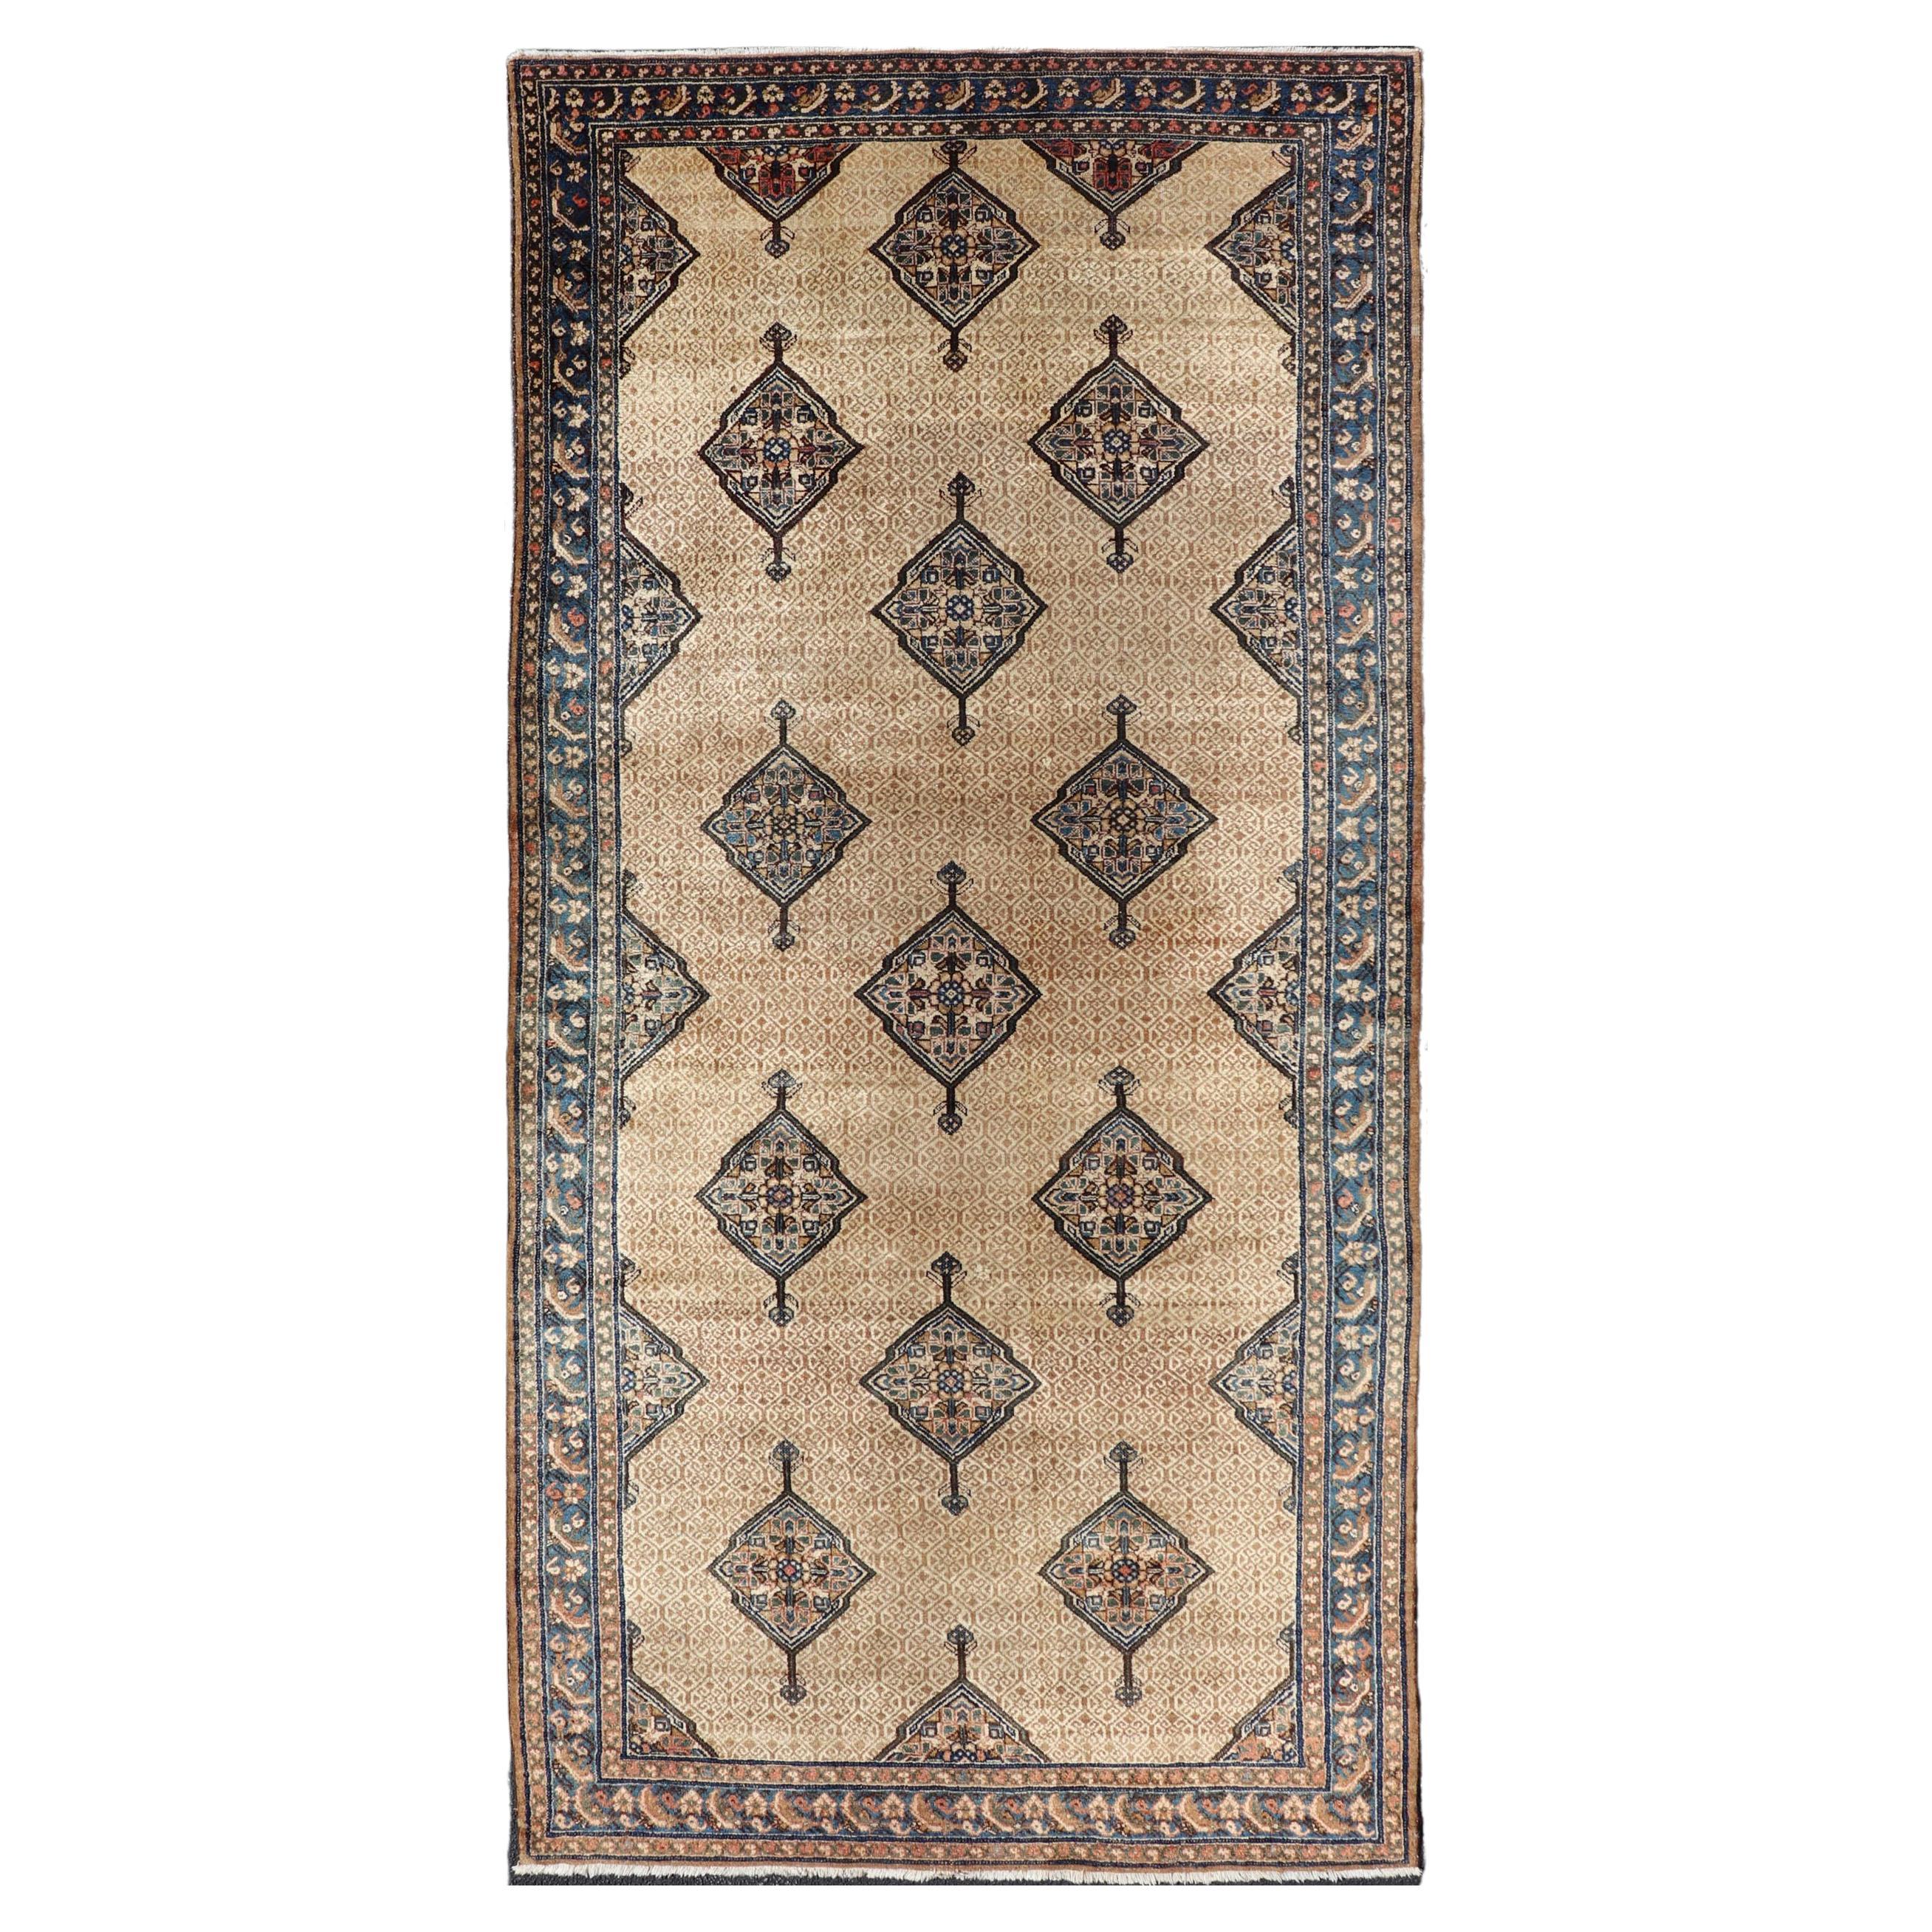 Antique Persian Serab Gallery with Tribal Geometric Design in Camel, Green, Blue